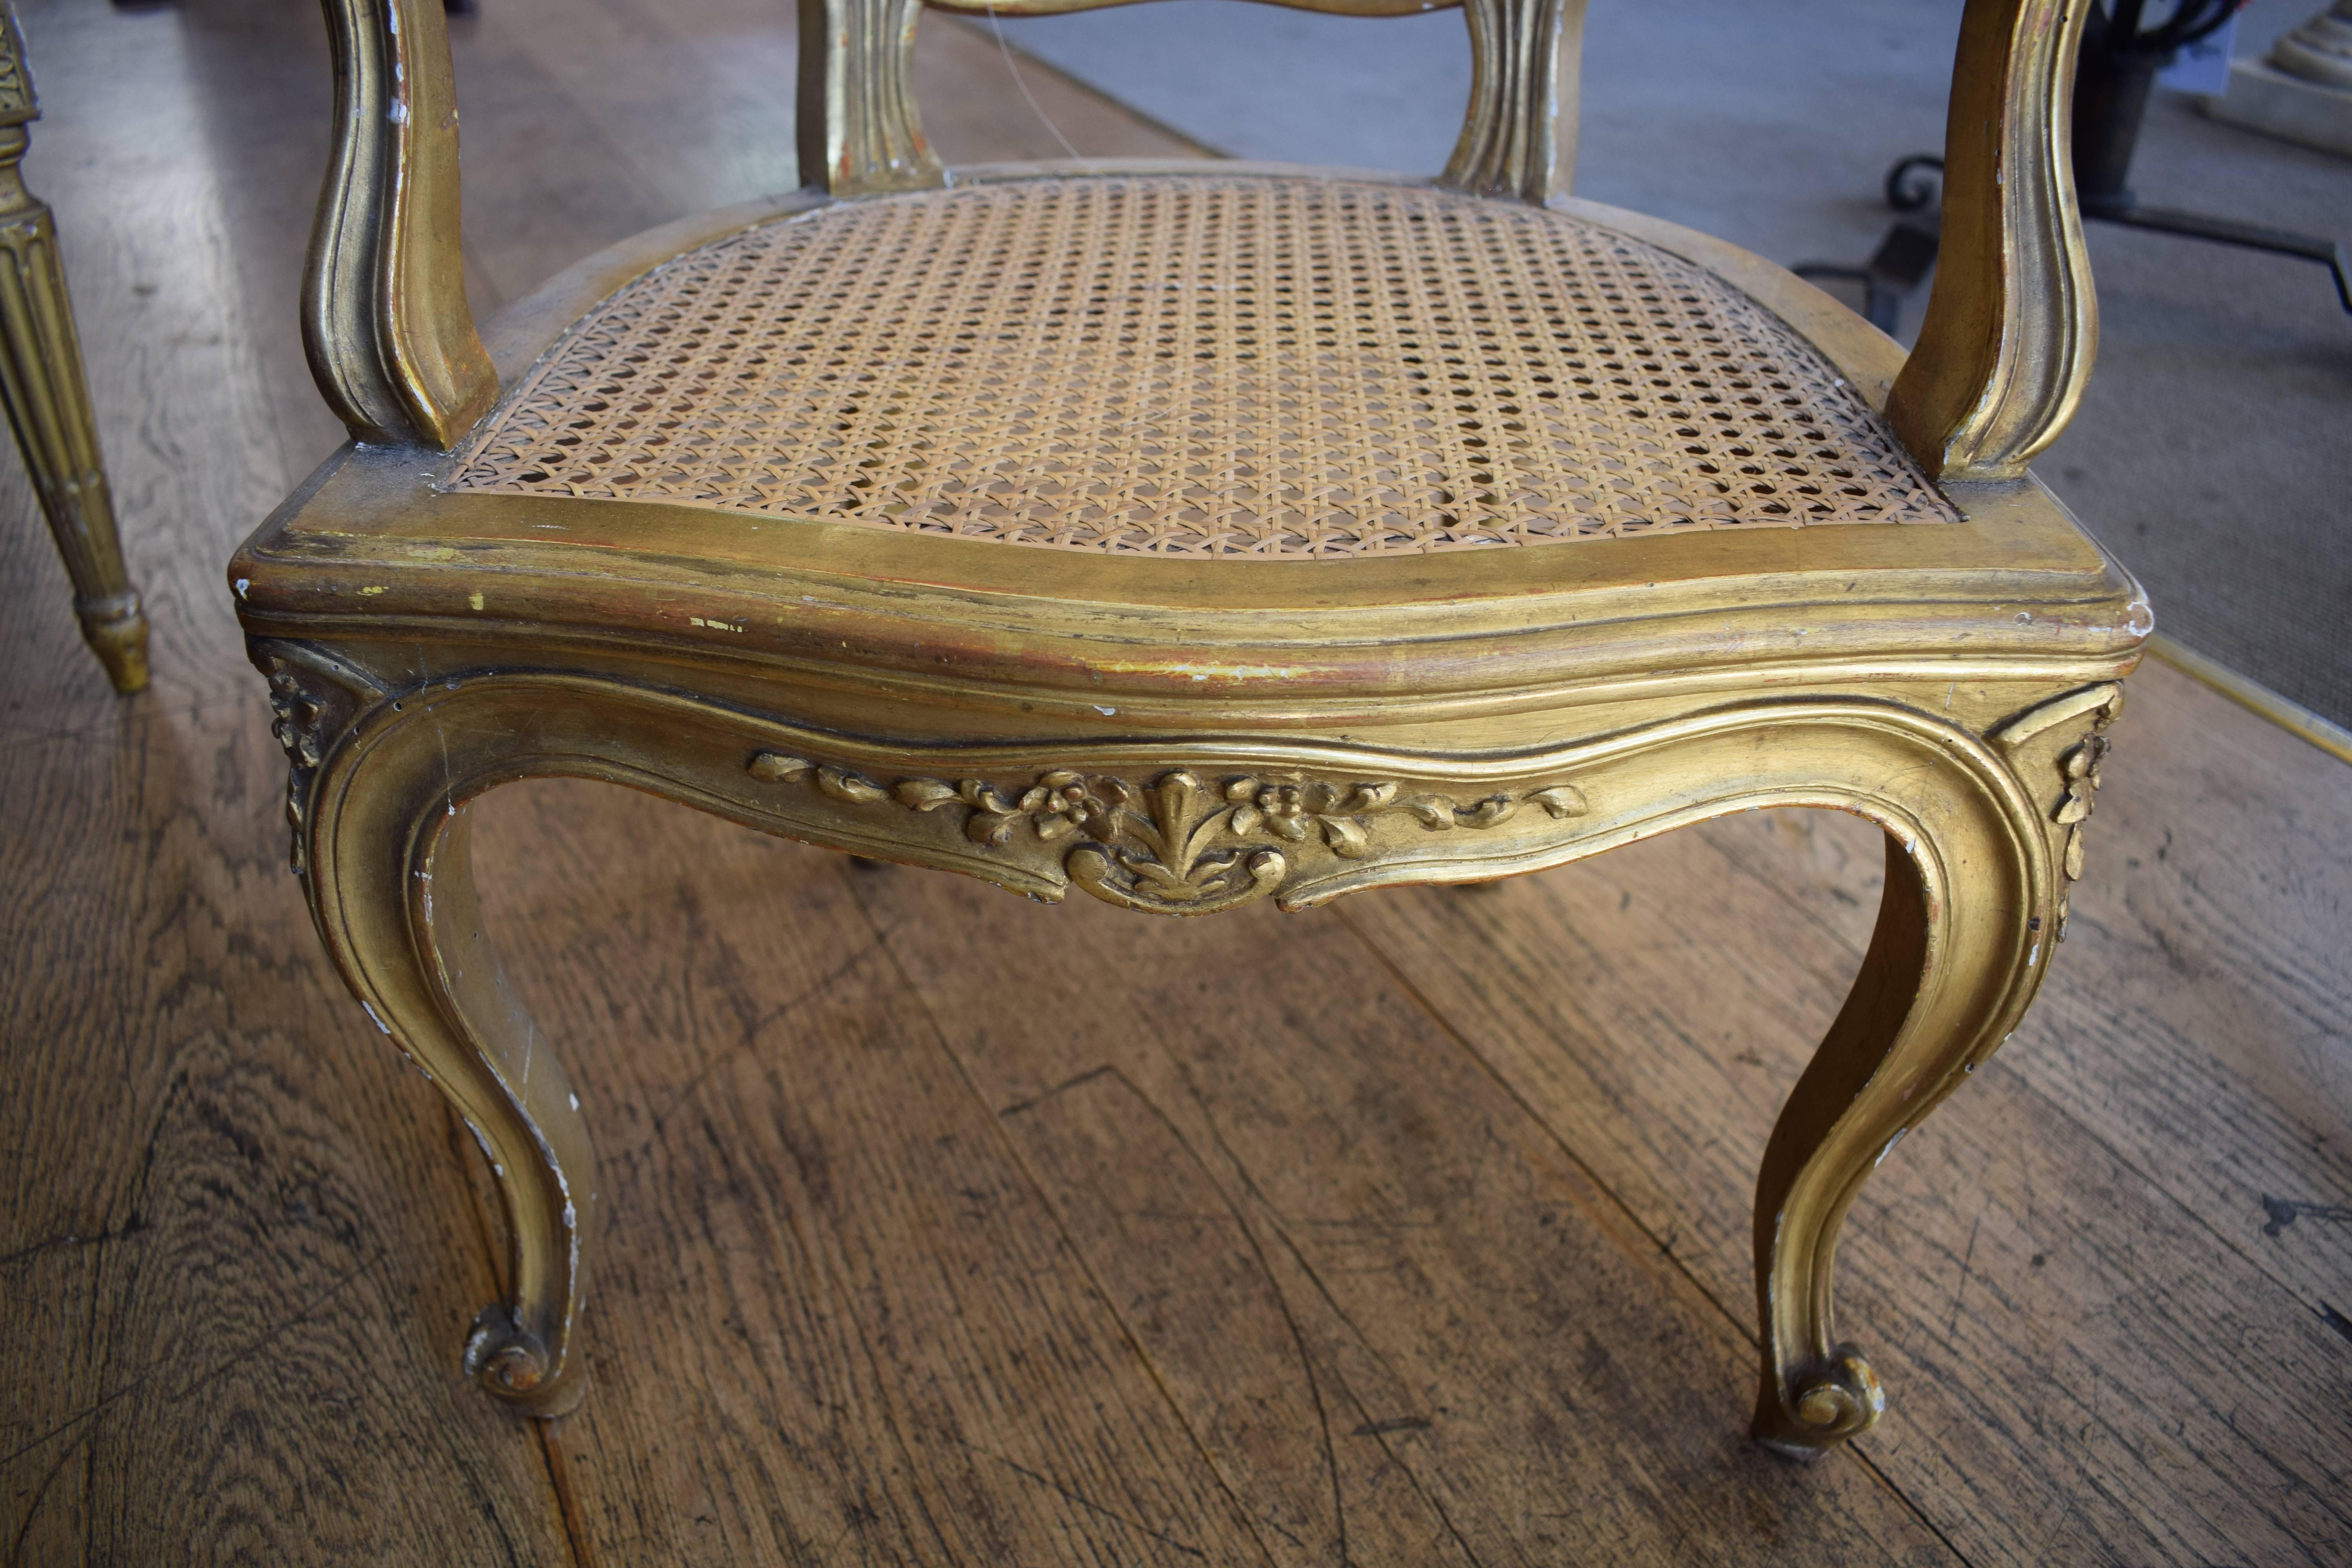 A rare 19th century miniature water gilded carved wood cane seat childs chair, sometimes referred to as an apprentice piece, circa 1860.